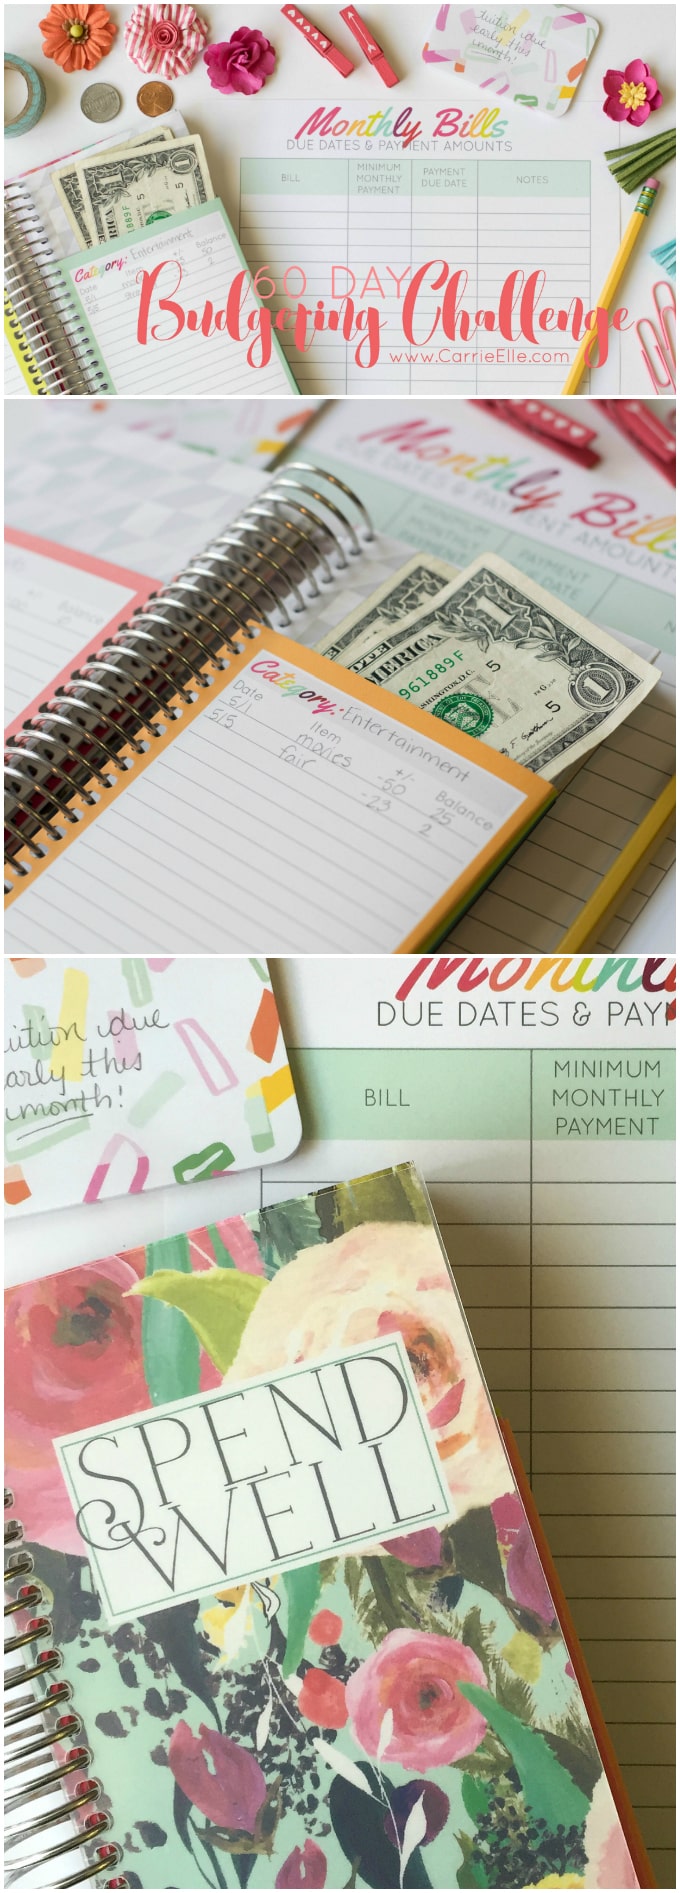 Carrie Elle 60 Day Budgeting Challenge